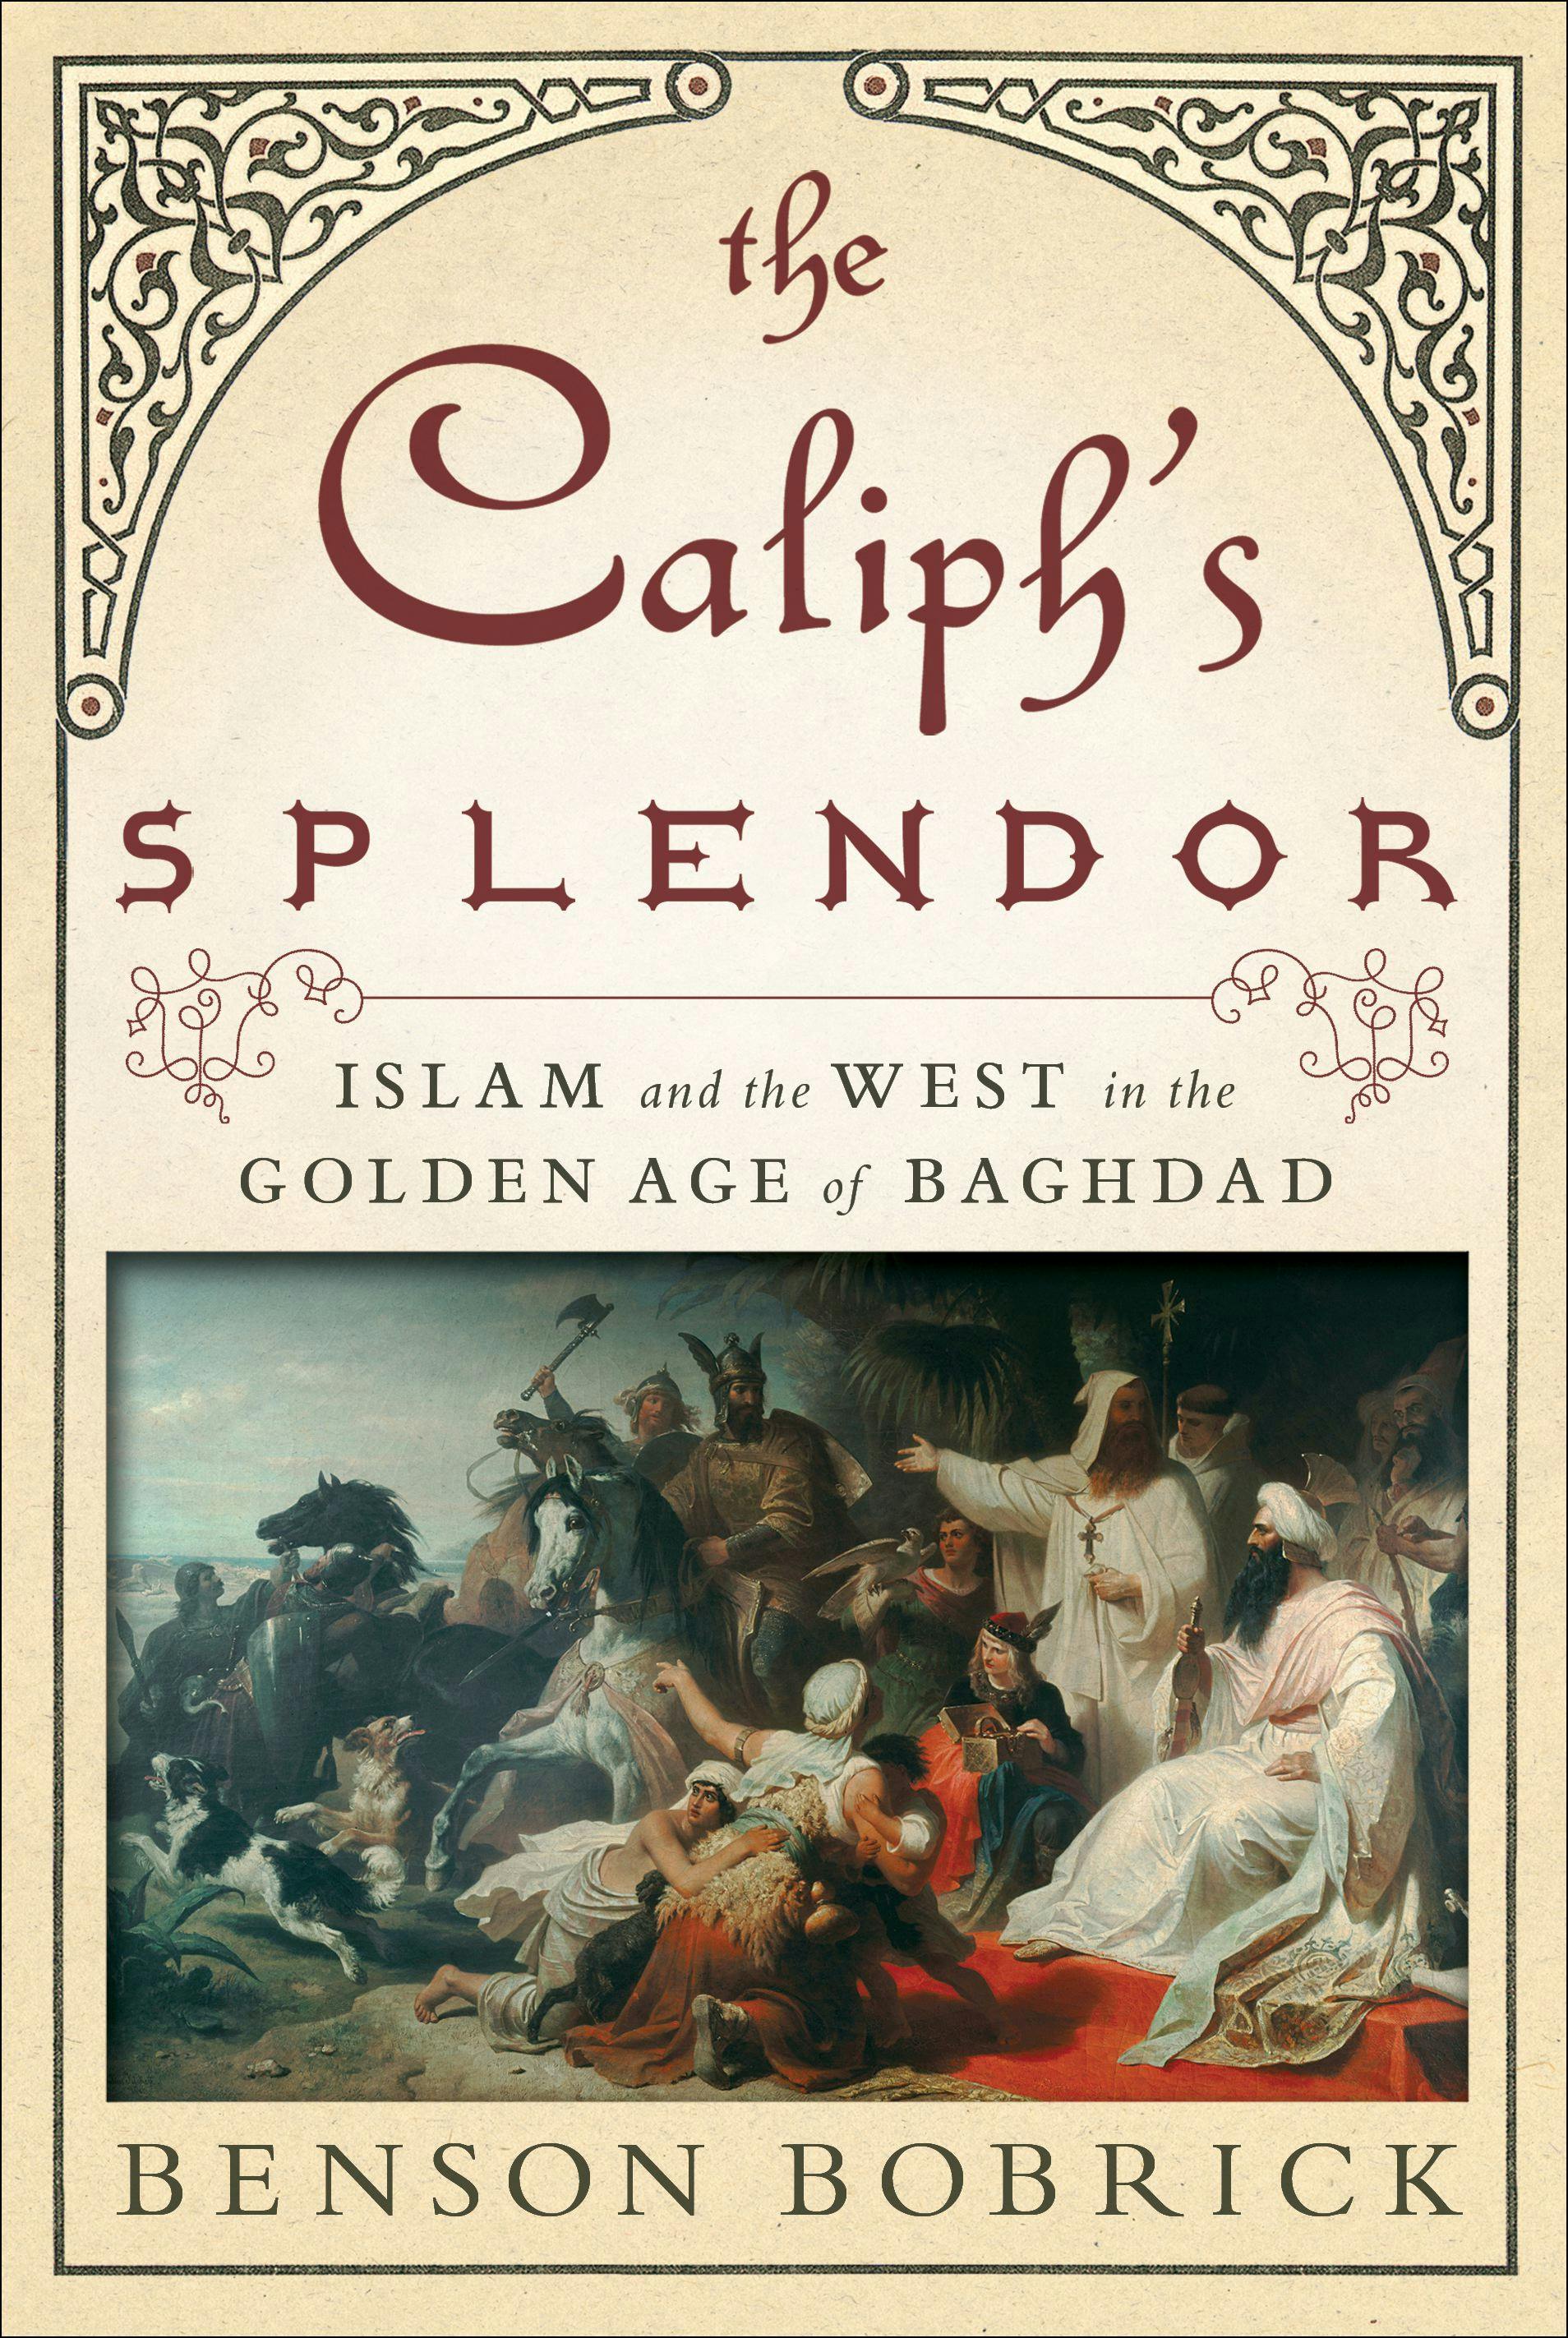 The Caliph's Splendor: Islam and the West in the Golden Age of Baghdad - Benson Bobrick